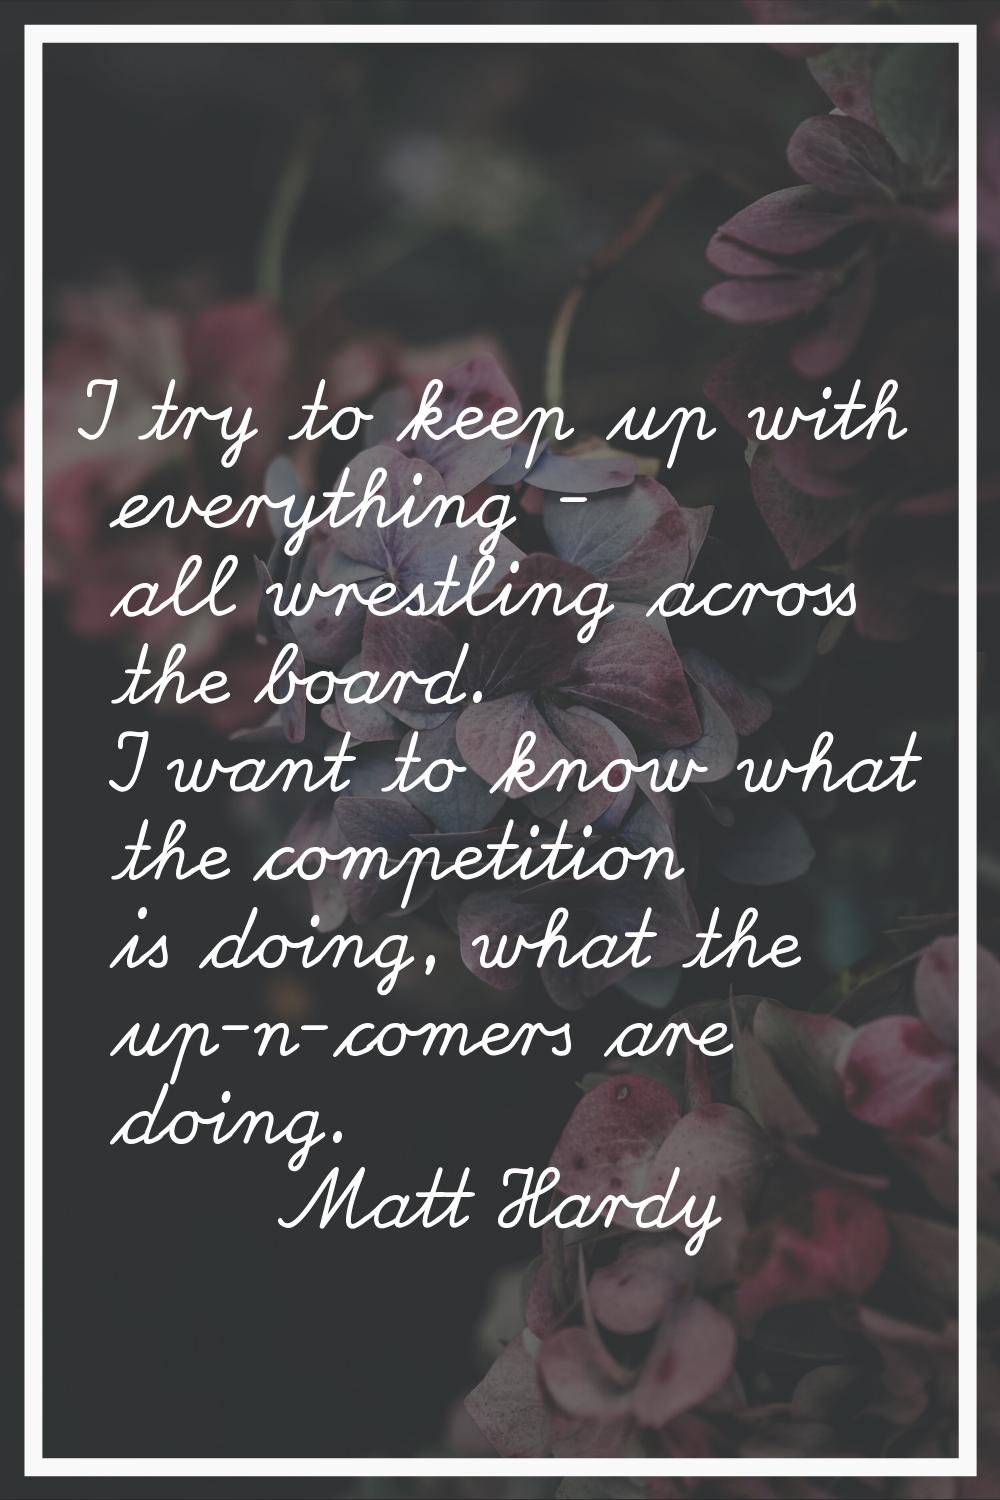 I try to keep up with everything - all wrestling across the board. I want to know what the competit